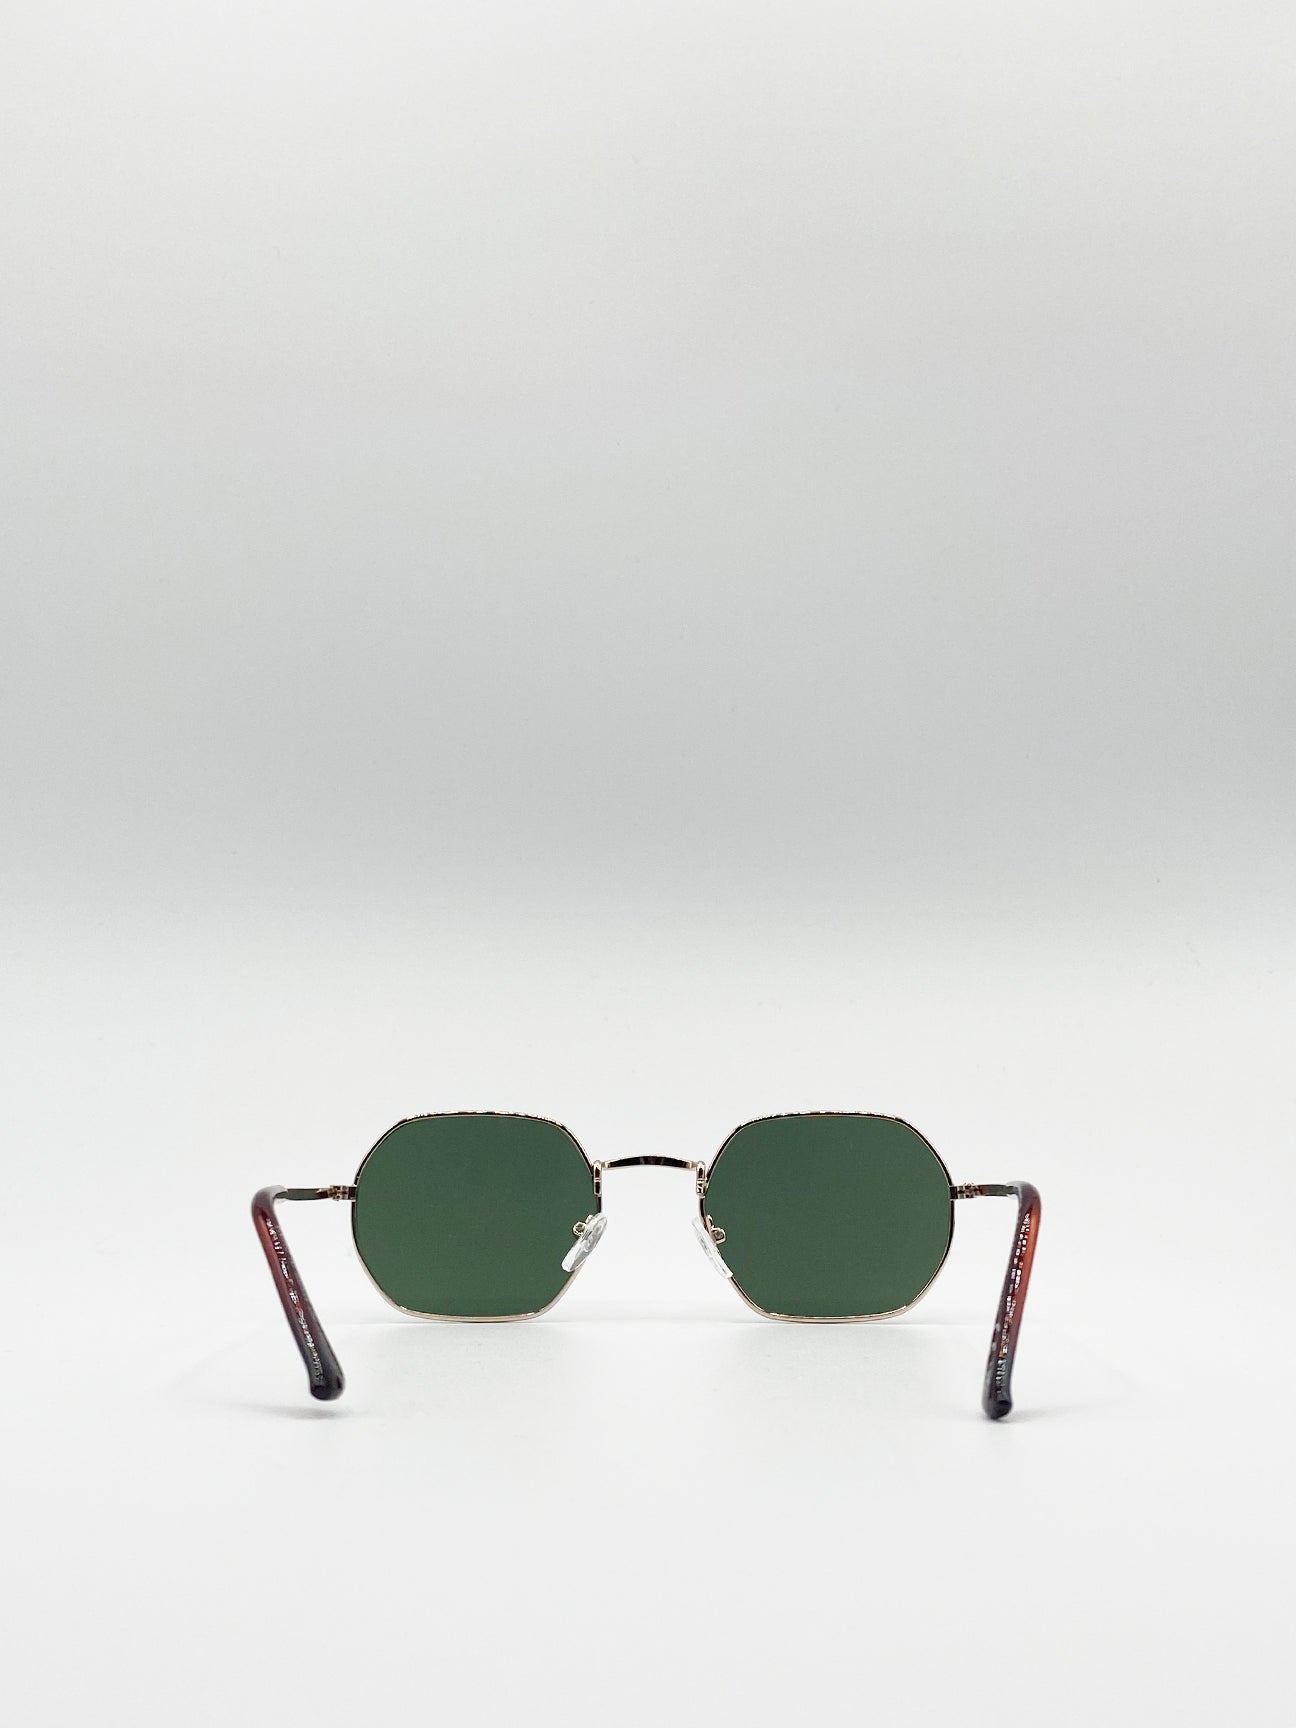 Hexagon Sunglasses  Gold with Green Lenses